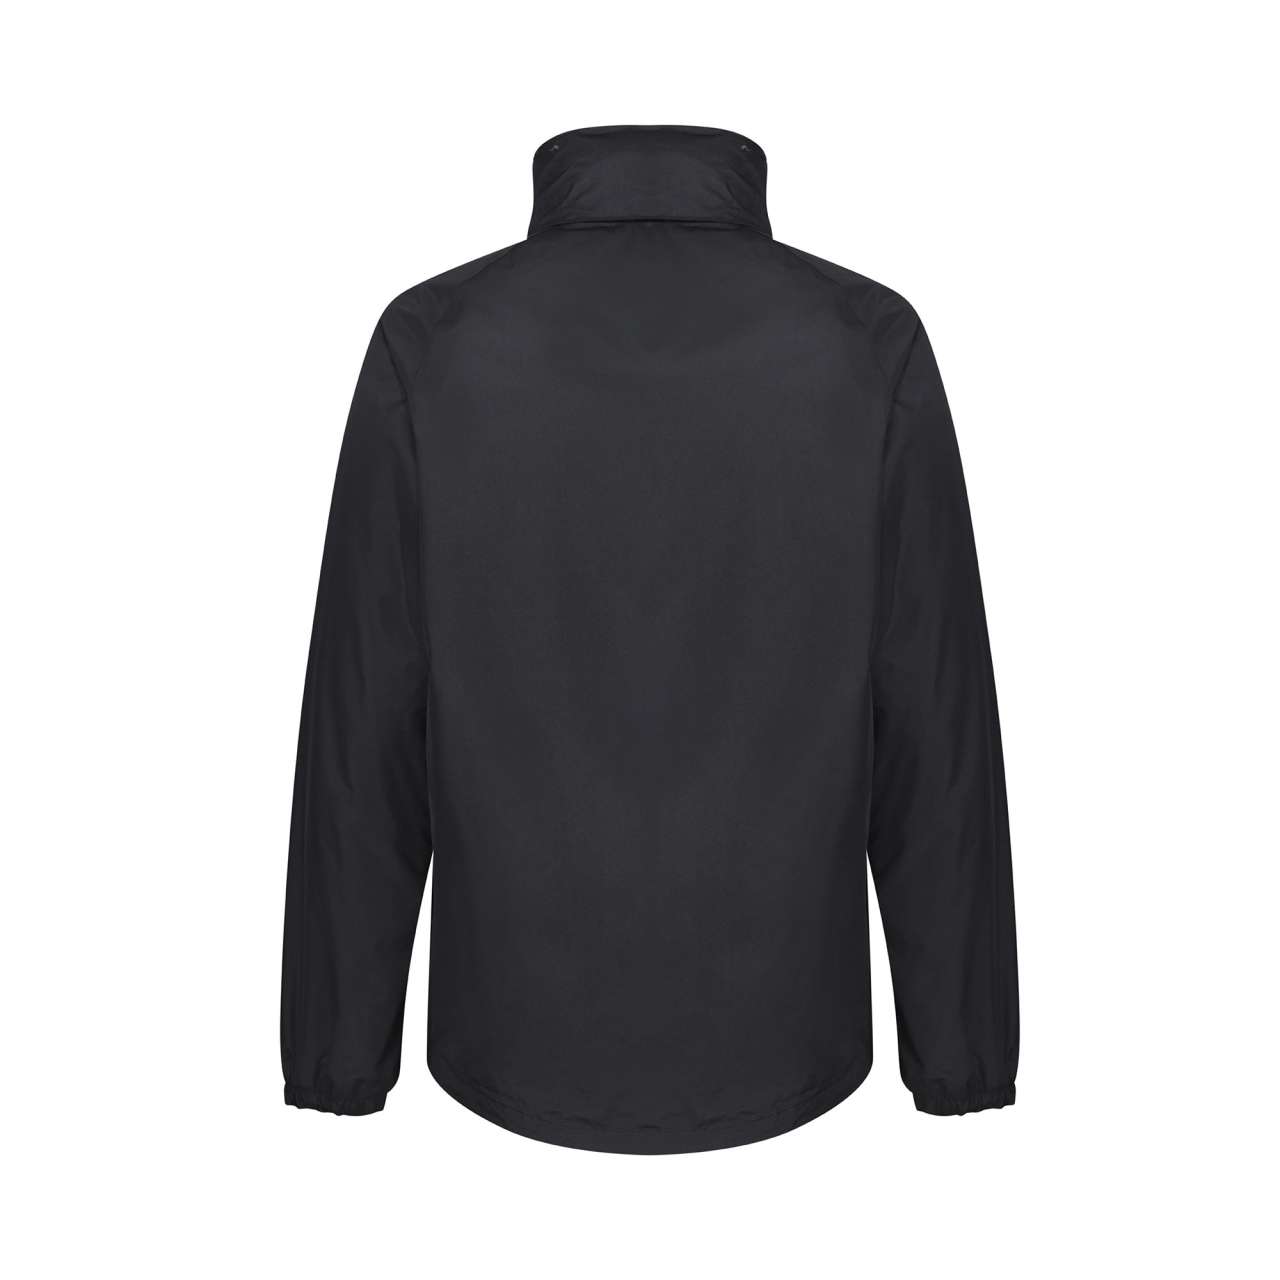 HONESTLY MADE RECYCLED 3-IN-1 JACKET WITH SOFTSHELL INNER